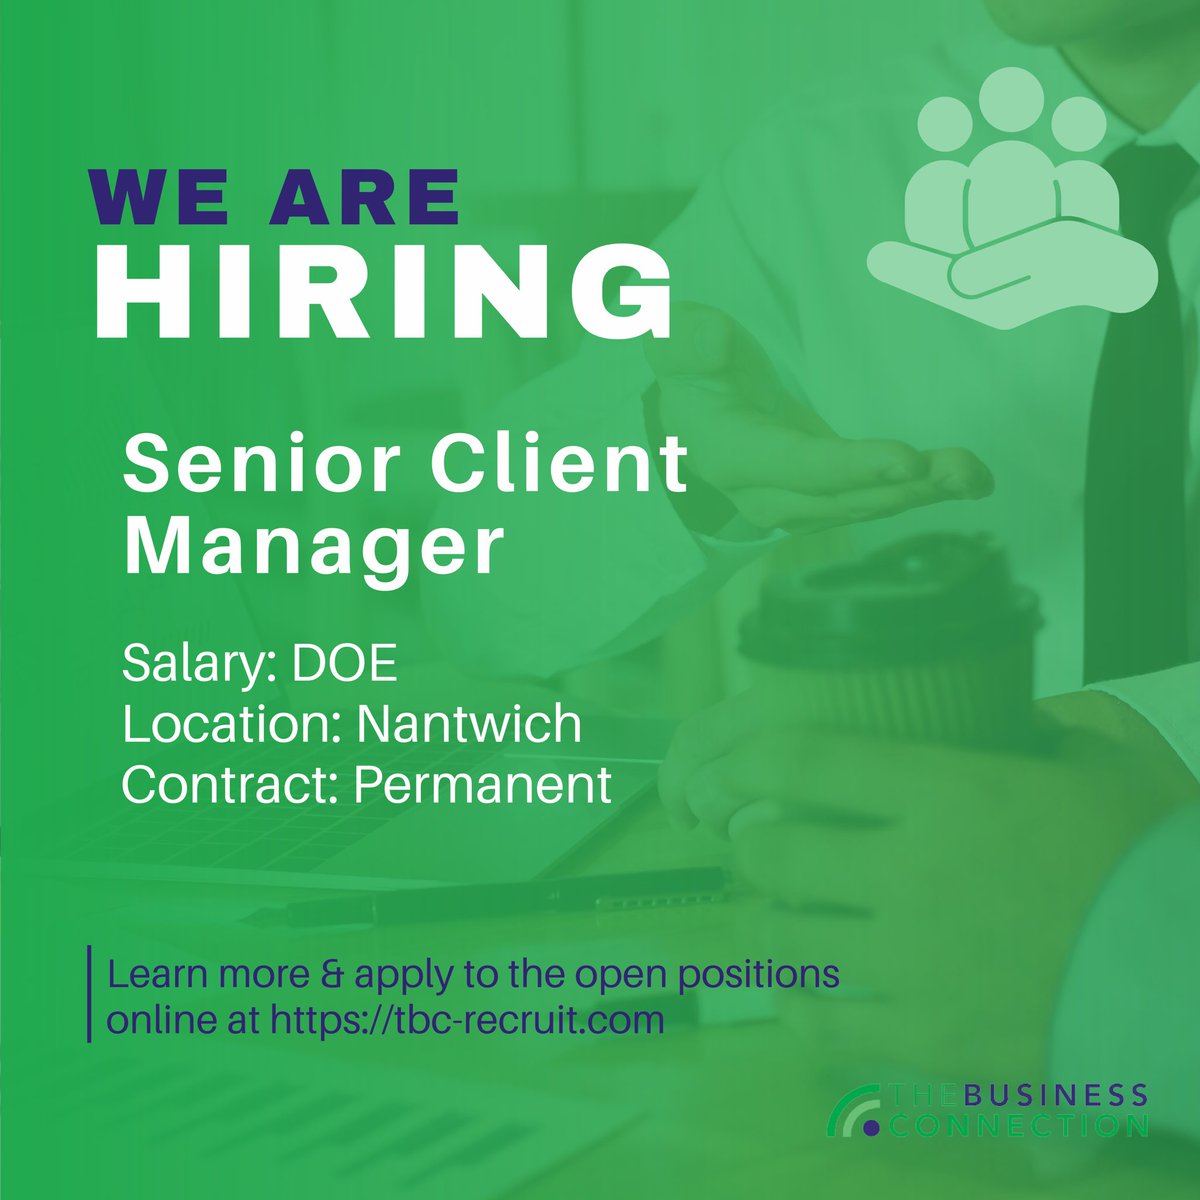 🌟 Opportunity in Nantwich! 

💼👩‍💼 We're seeking an experienced senior client manager to join our team. 

Apply now to take your career to the next level! 📝✨ 
tbc-recruit.com

#NantwichJobs #SeniorClientManager #JoinOurTeam